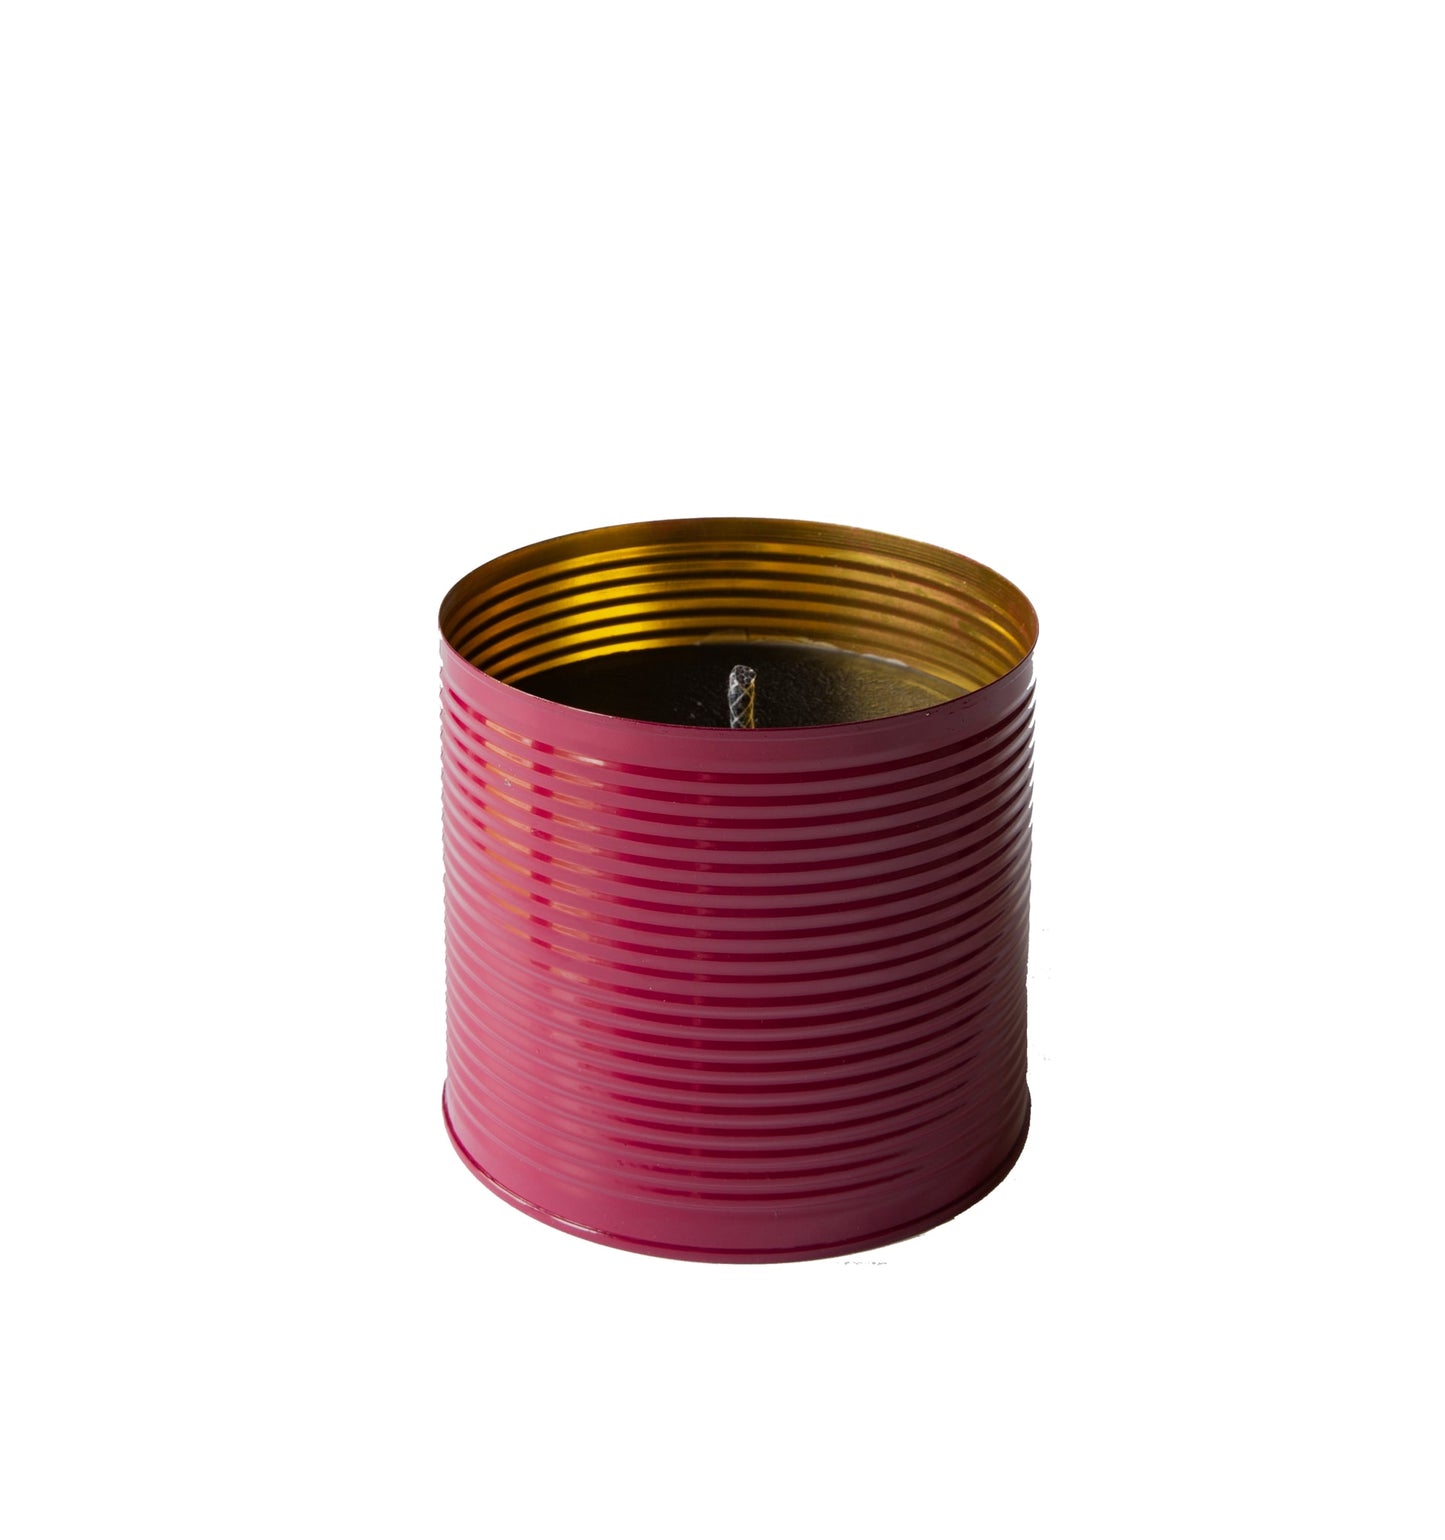 Outdoor Candle - Living by Heart - Plum / Bordeaux